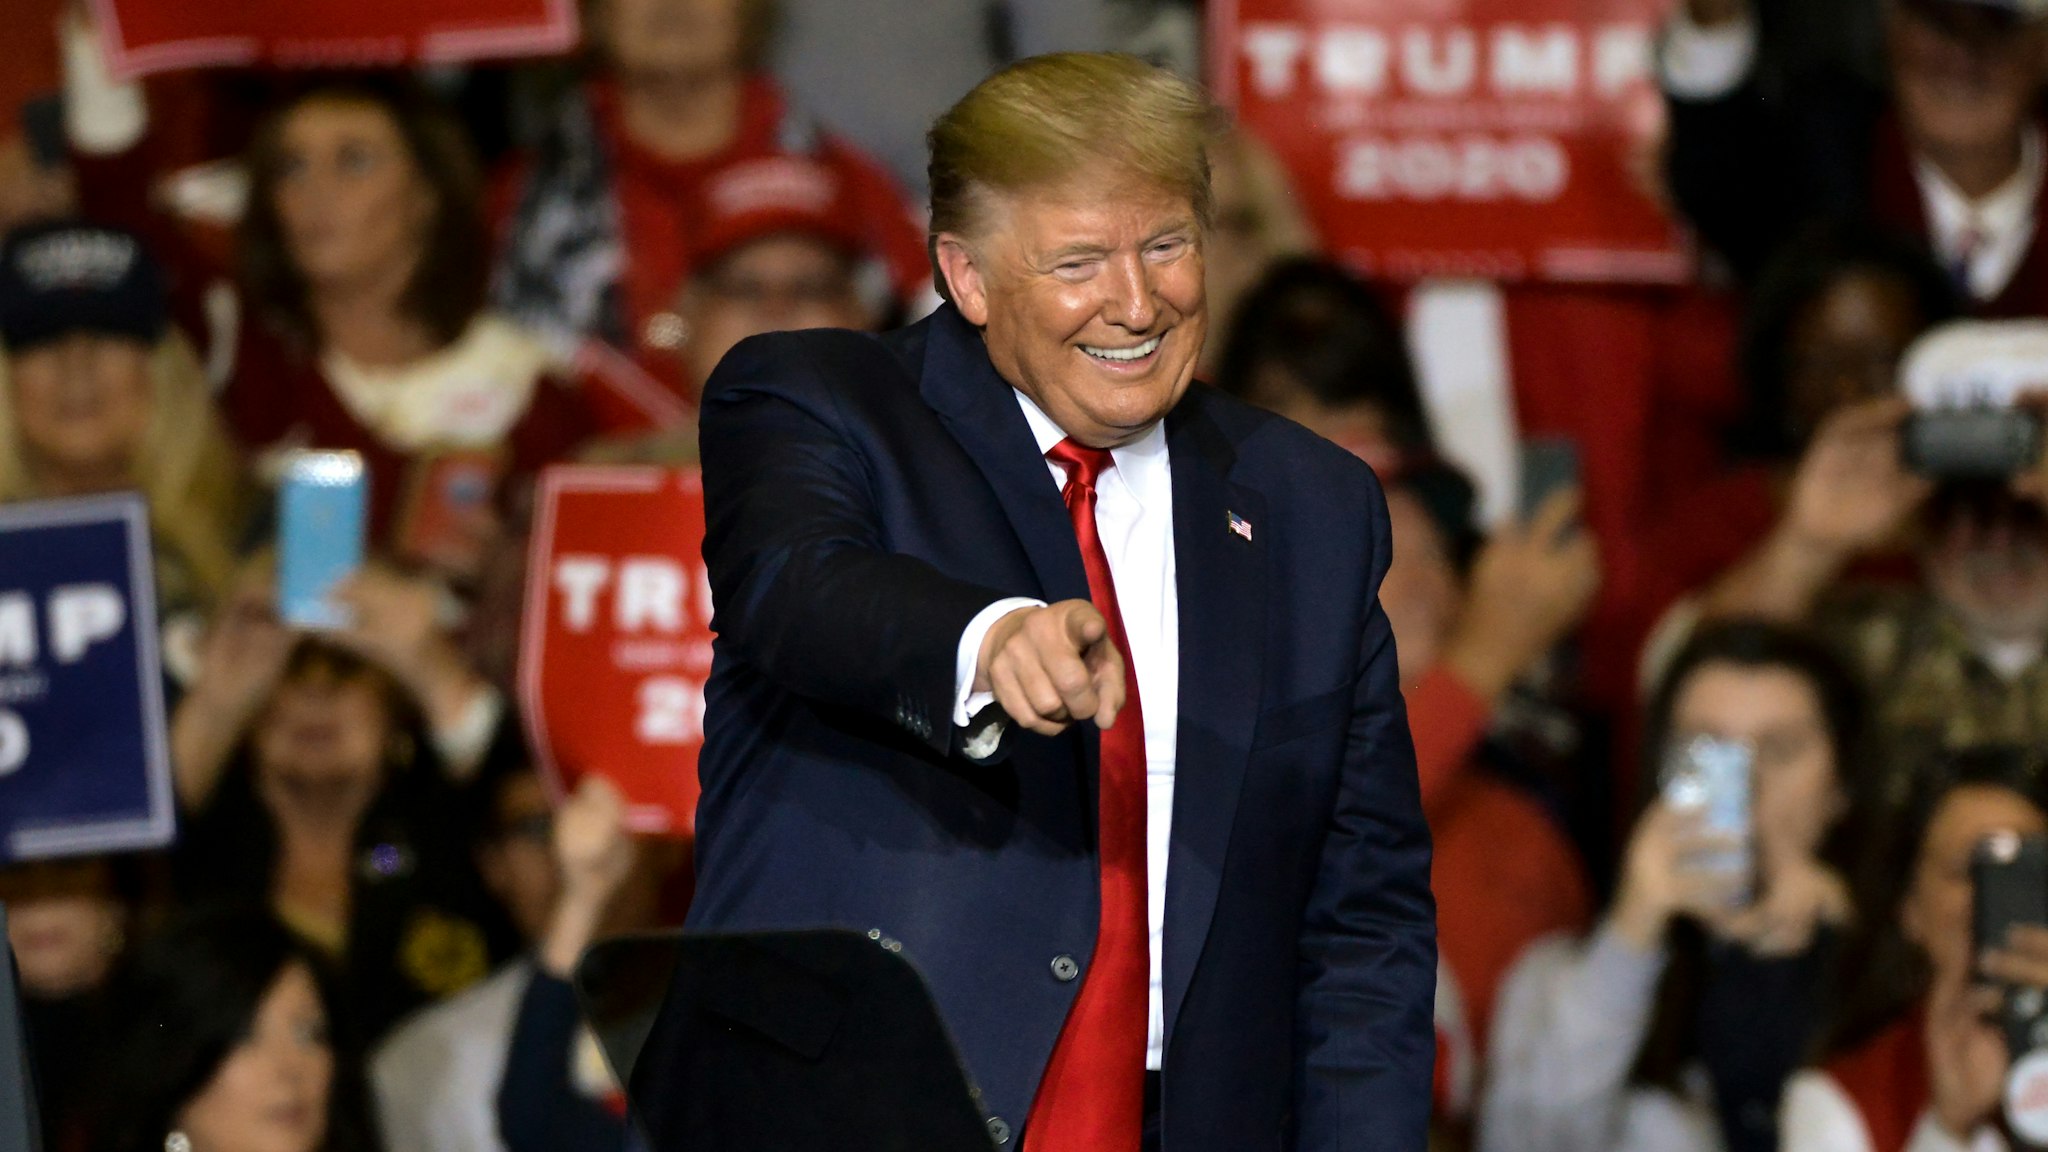 President Donald Trump points toward the crowd during a "Keep America Great" campaign rally at BancorpSouth Arena on November 1, 2019 in Tupelo, Mississippi. Trump is campaigning in Mississippi ahead of the state's gubernatorial election where Republican candidate Tate Reeves is in a close race with Democrat Jim Hood.